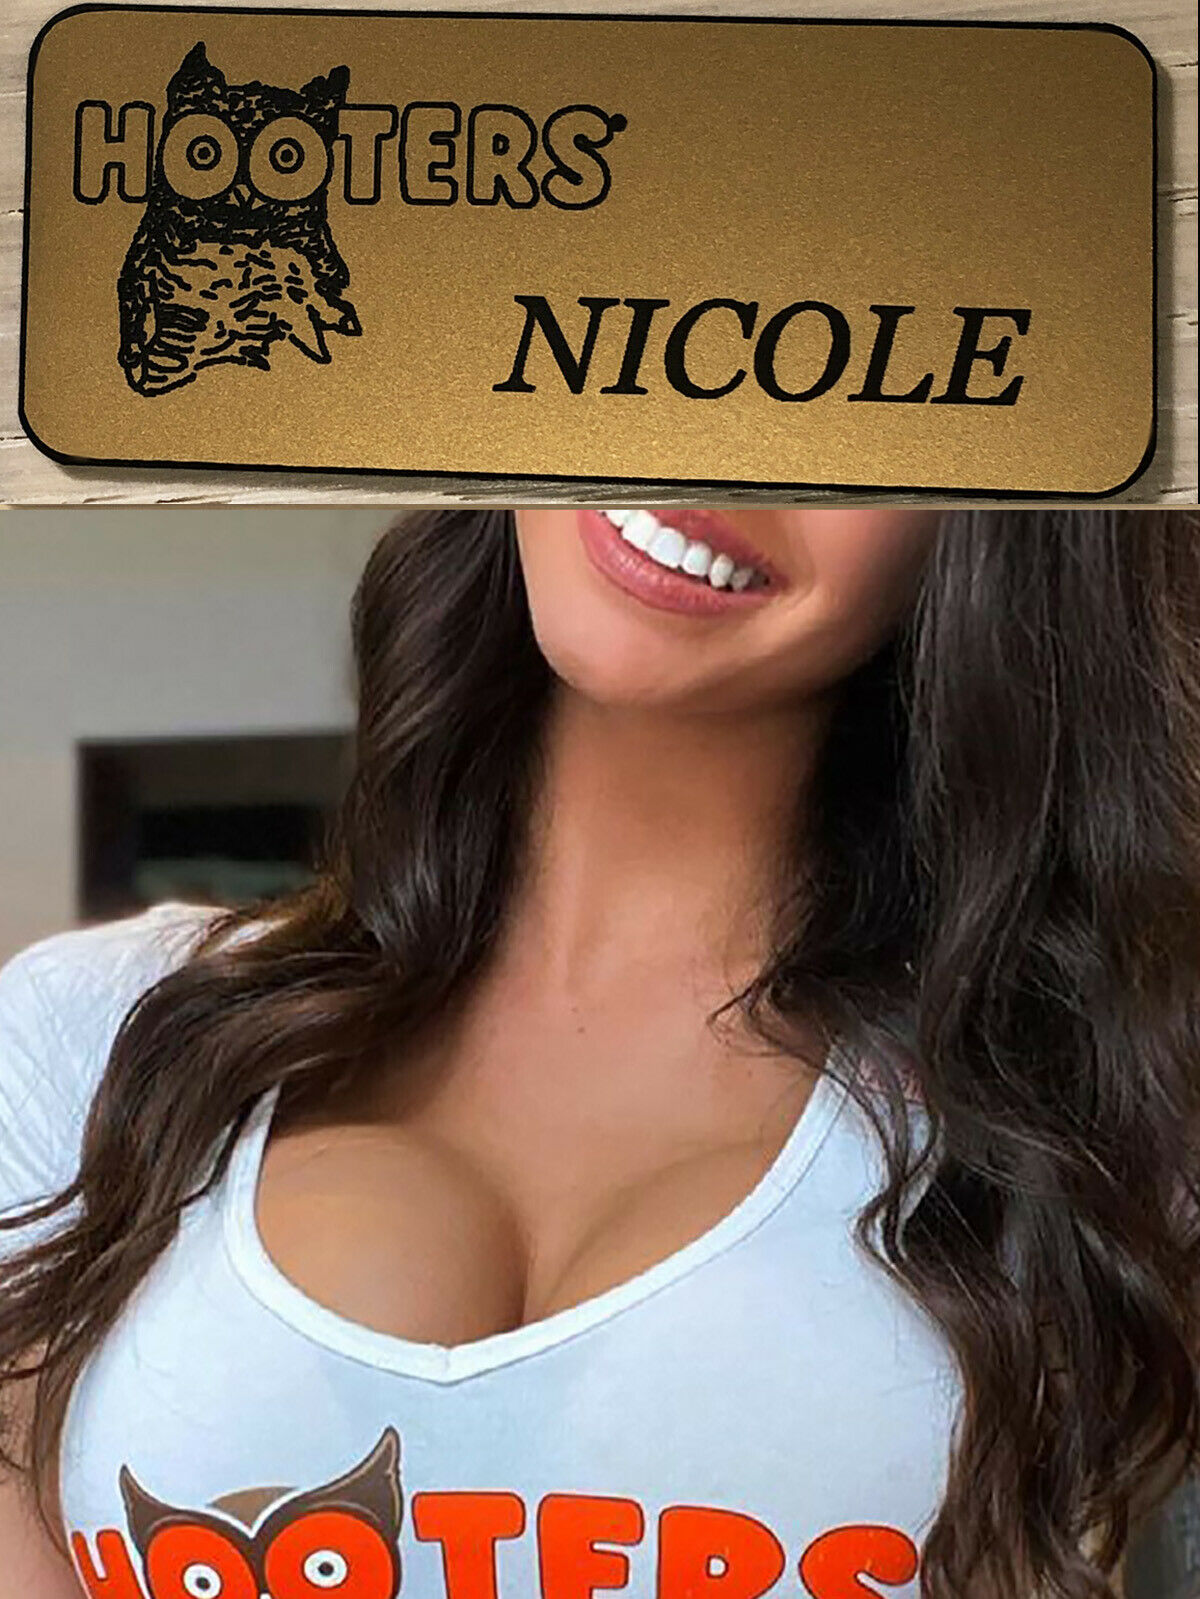 ~new~ Nicole Gold Name Tag Hooters Uniform Halloween Costume Collectible Pin